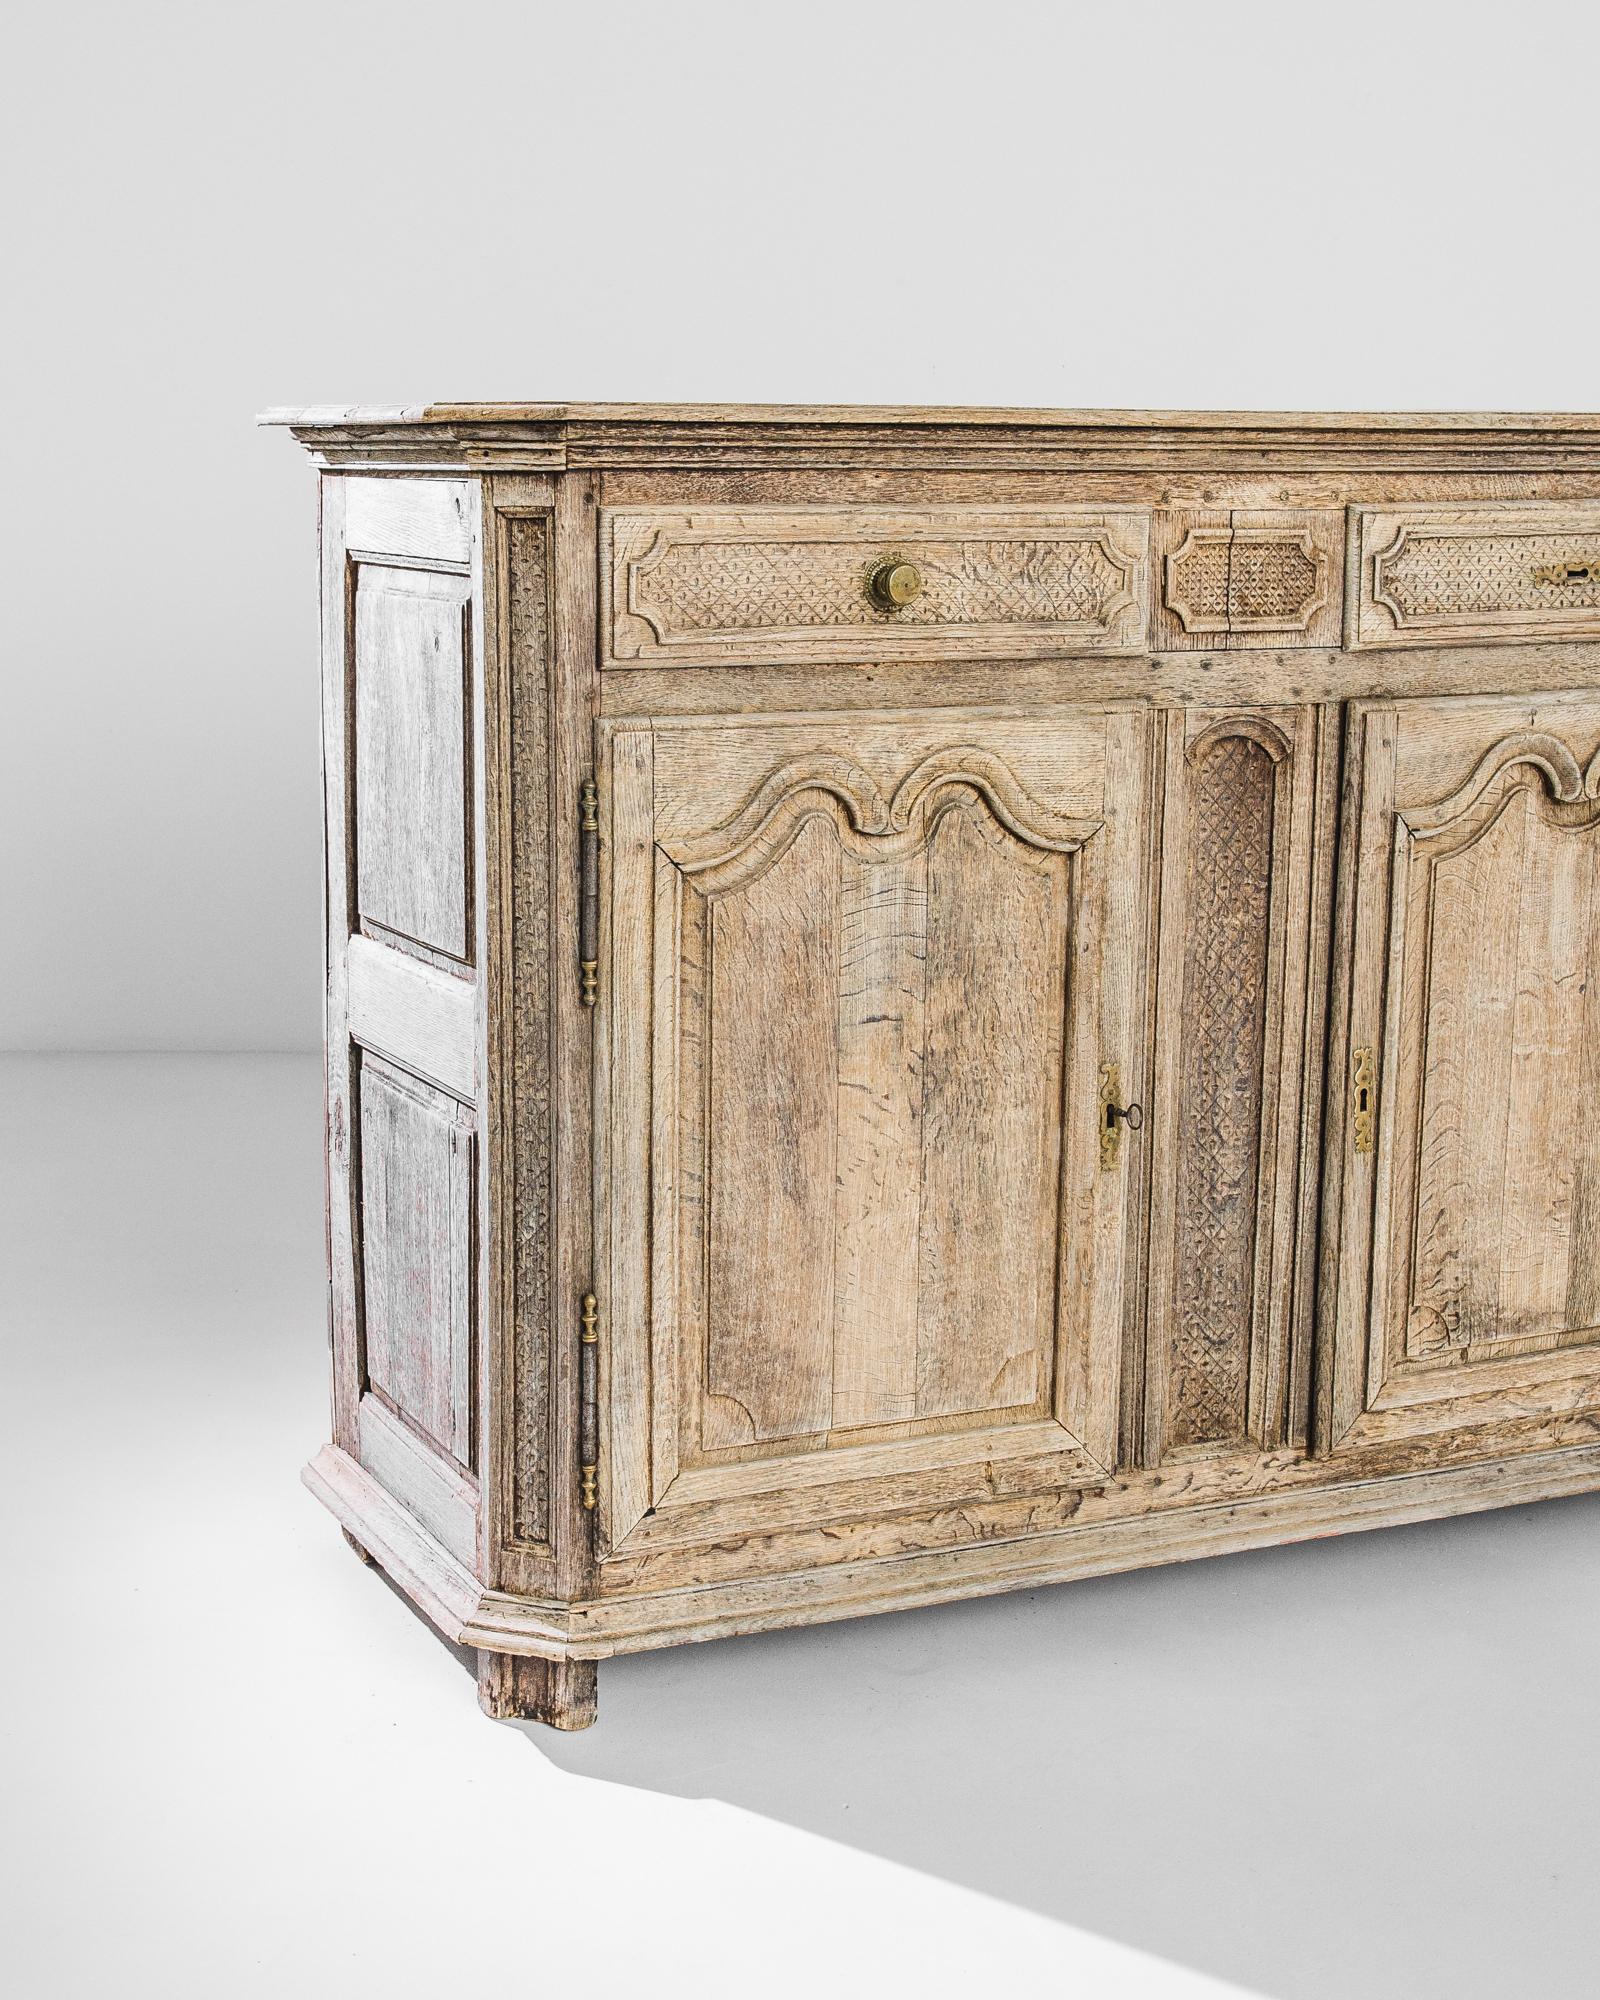 Handcrafted circa 1800 in France, this exquisite bleached oak buffet features two drawers resting over two panel doors with original brass hardware —a doorknob and three ornate locks. Top drawers and the spaces between the doors are decorated with a